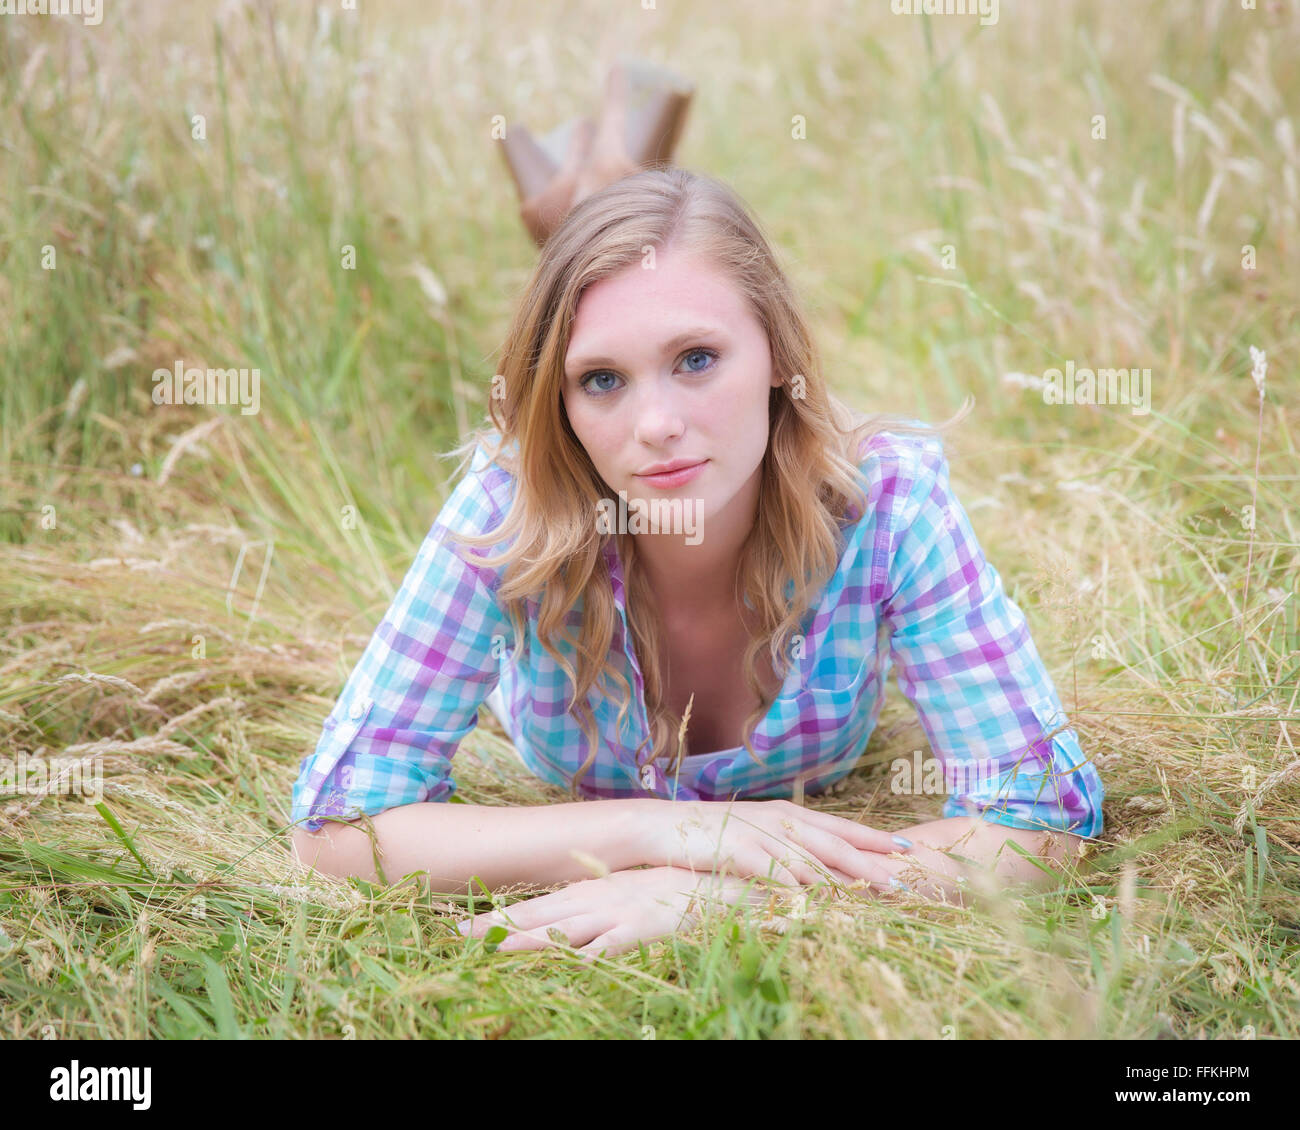 Beautiful blond woman in a tall grass laying on her stomach Stock Photo